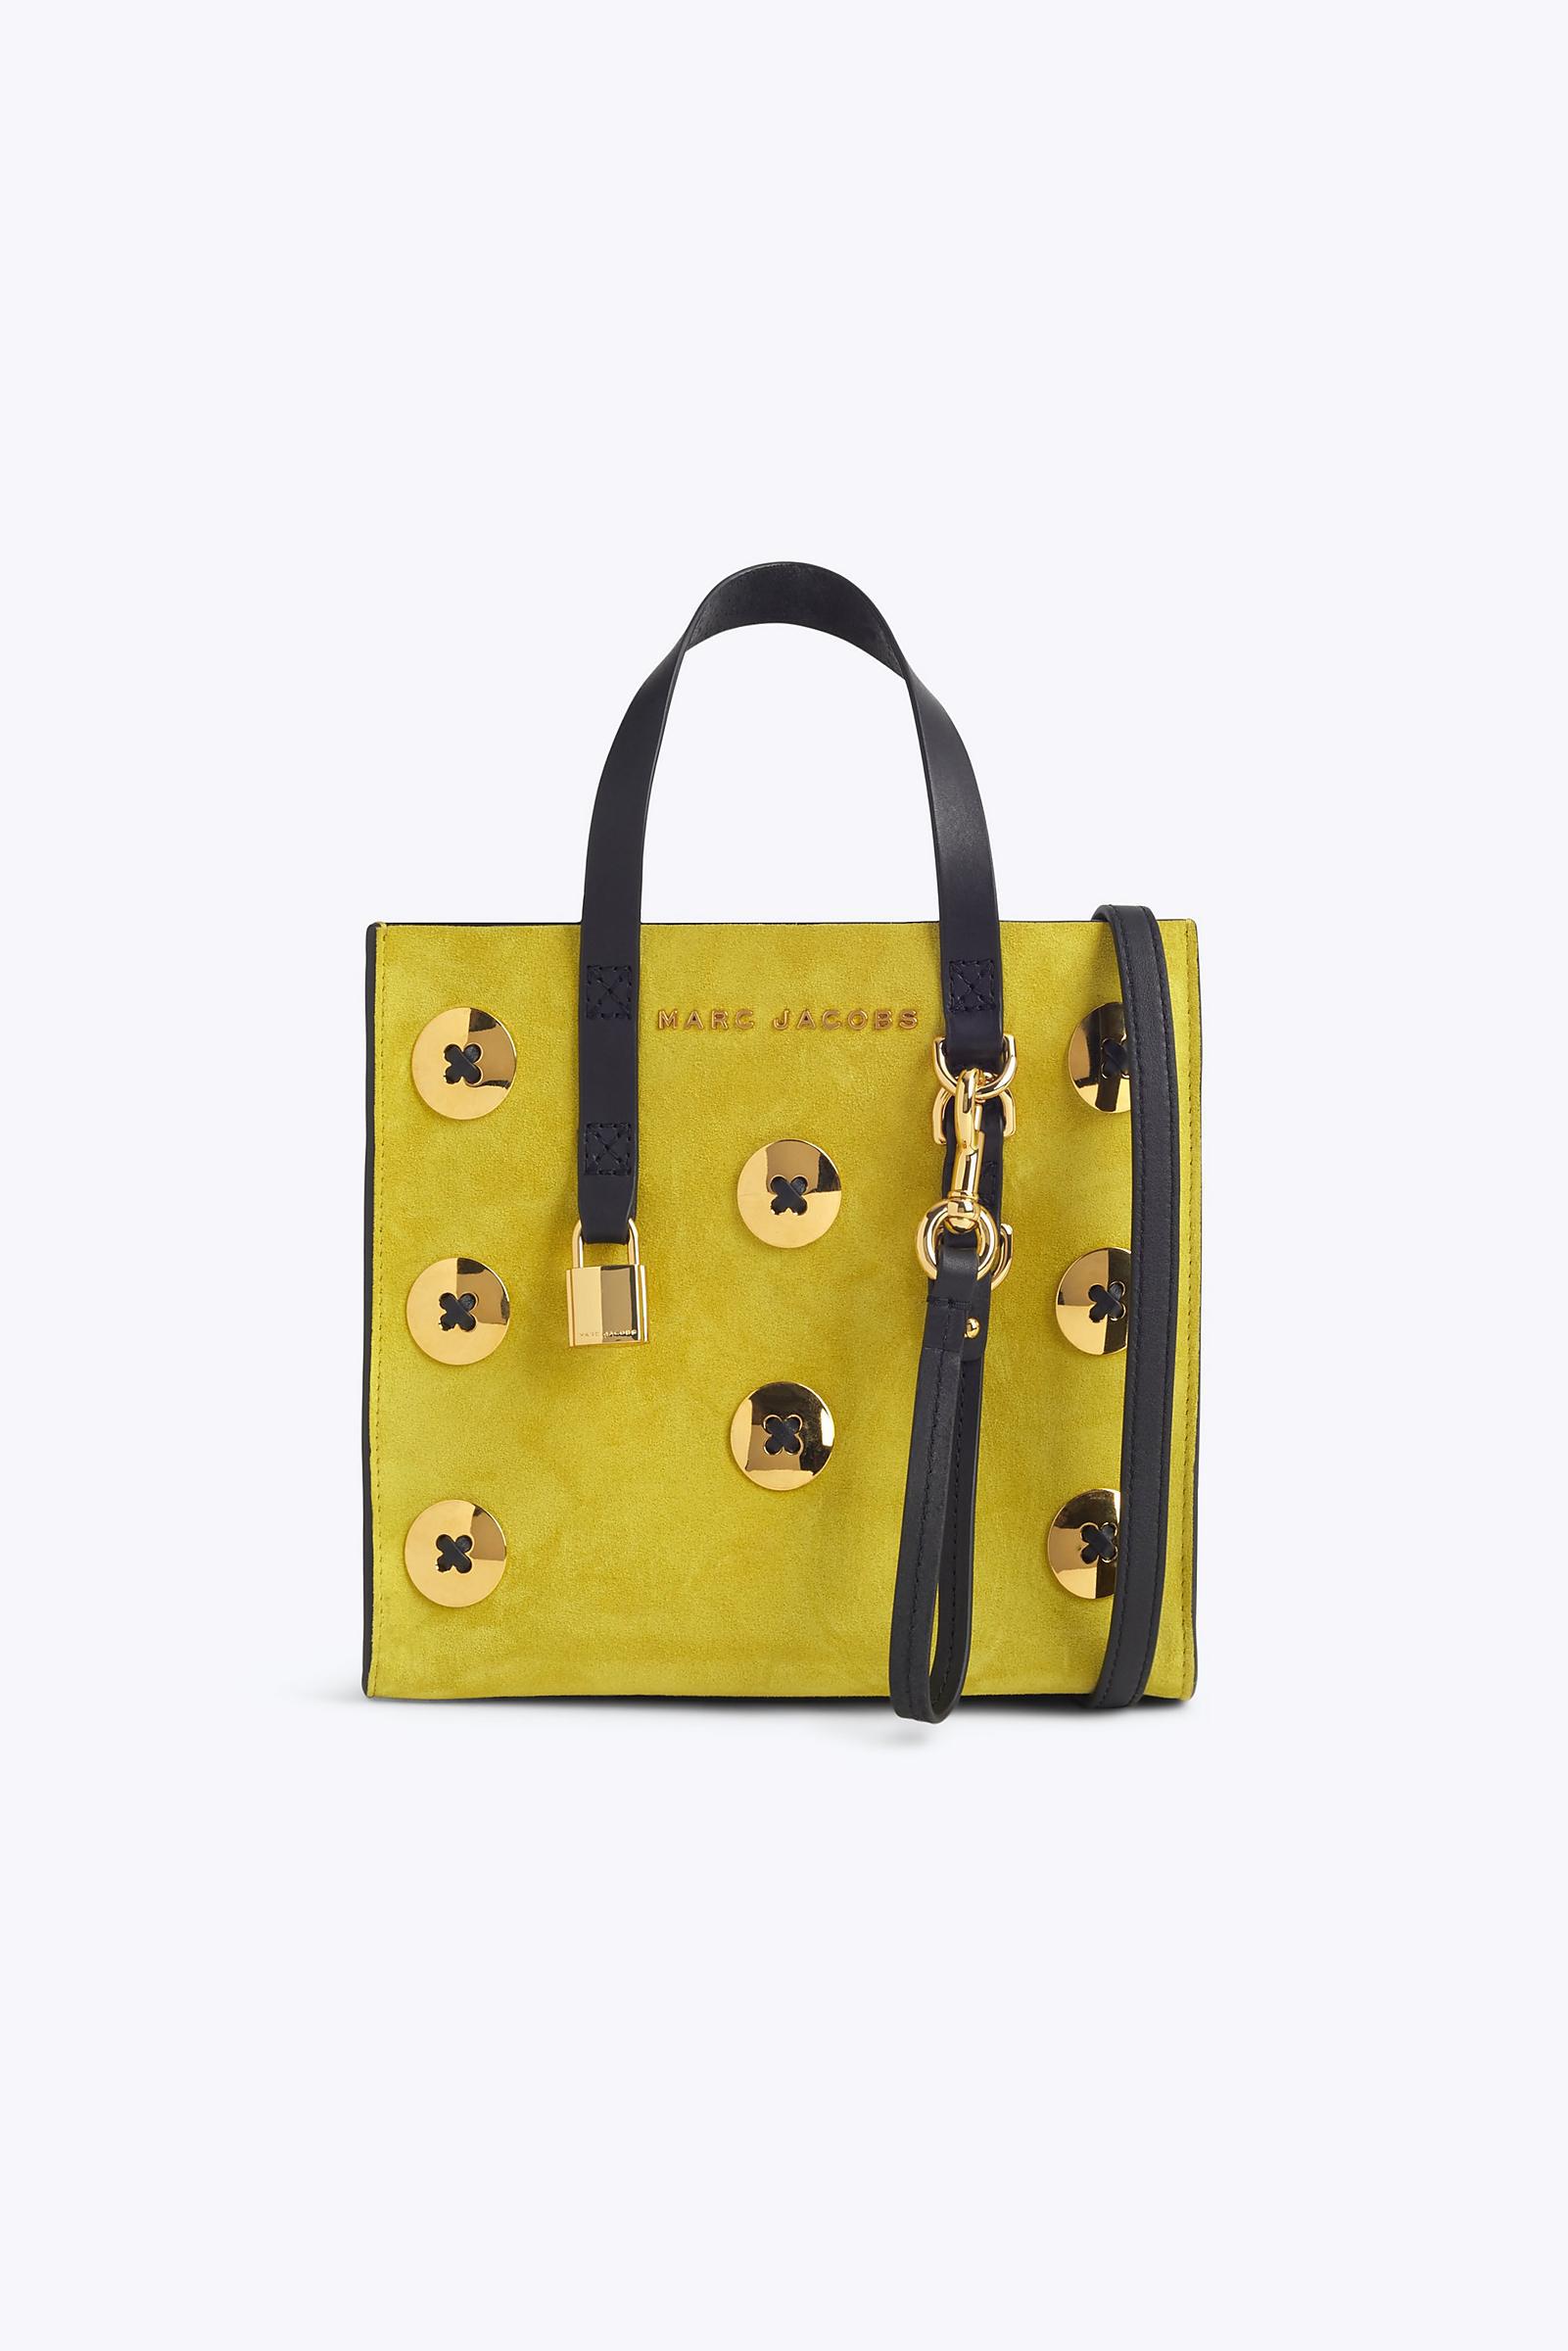 Marc Jacobs Leather Mini Grind Bag in Lemon (Yellow) - Lyst